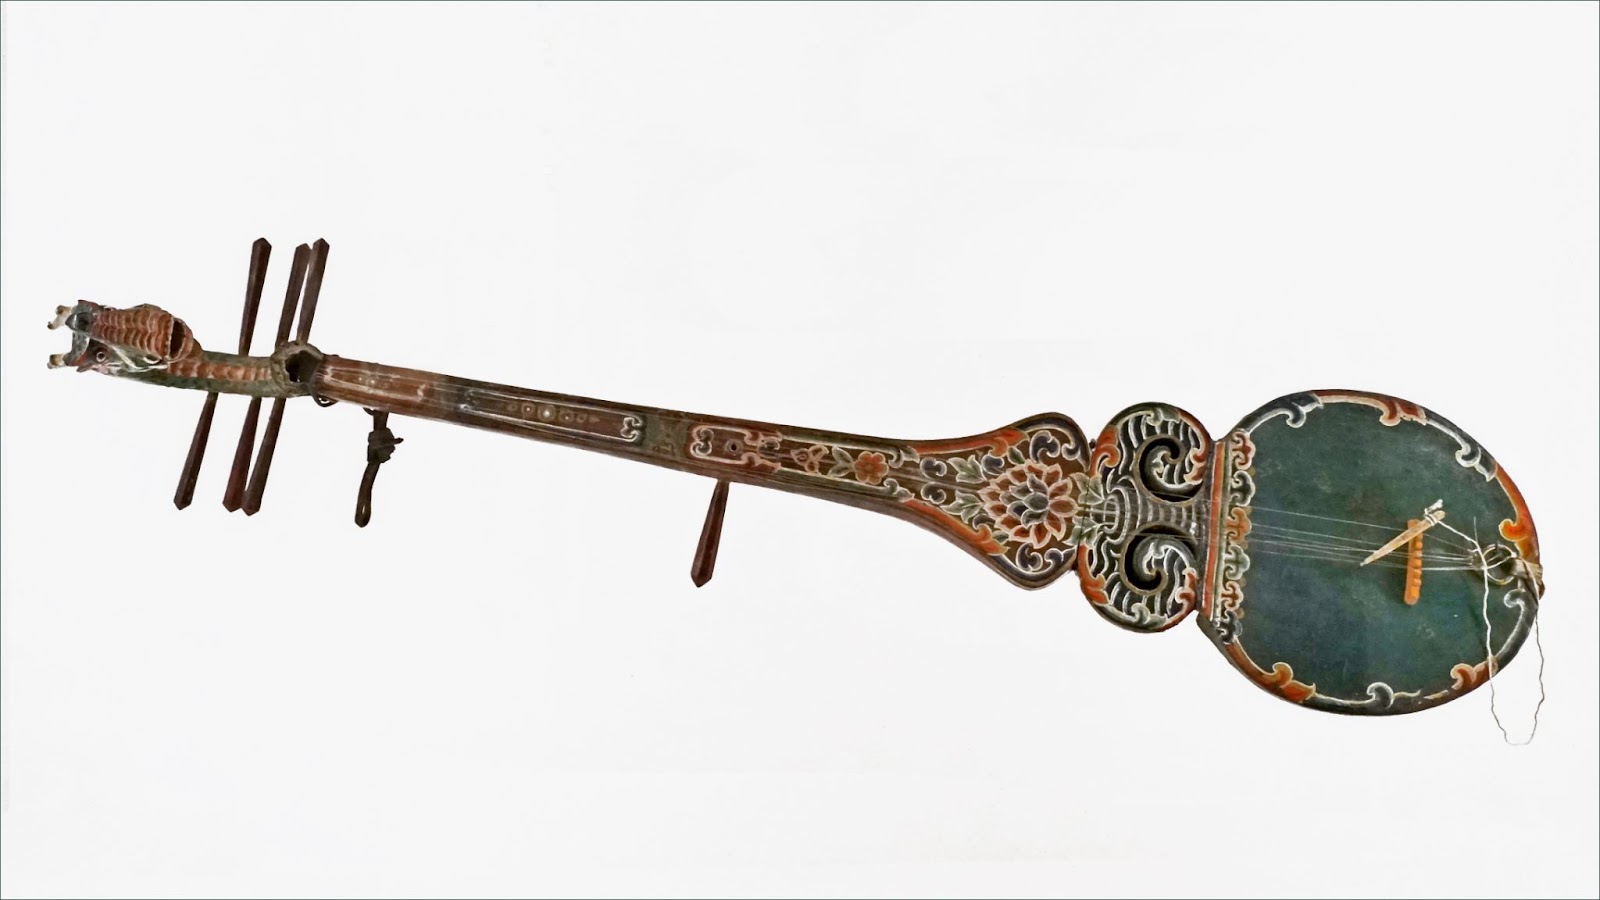 Dranyen or lute, a traditional Bhutanese instrument 
